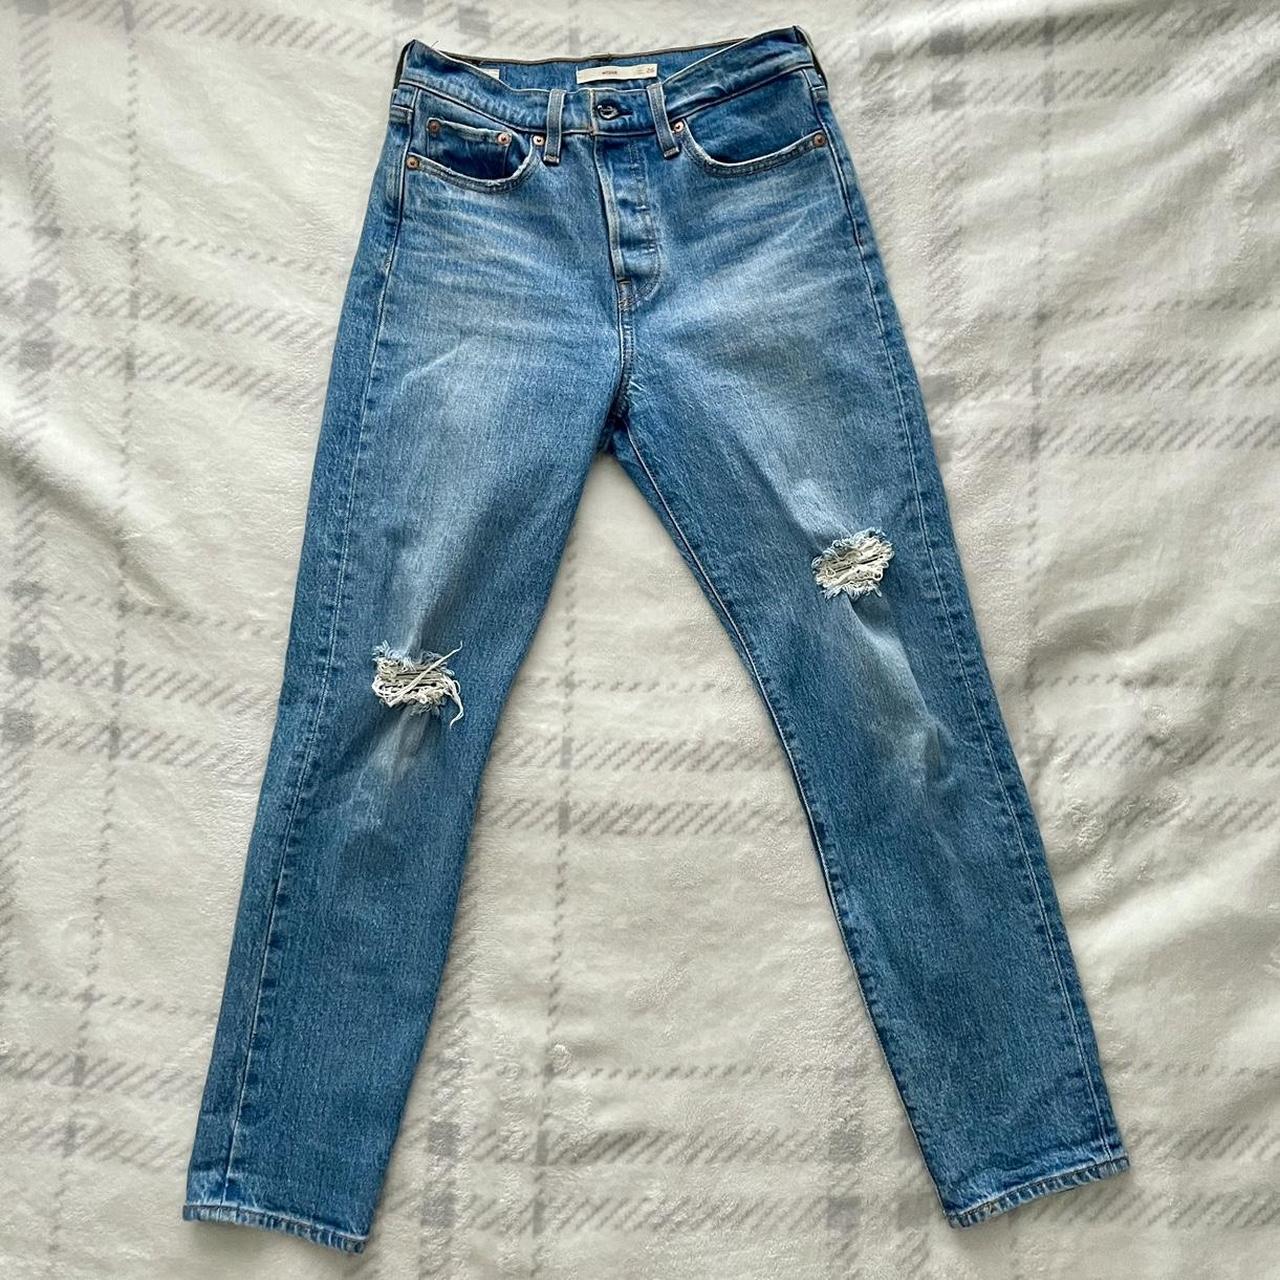 Premium Wedgie Fit Levi’s Jeans High rise, straight... - Depop